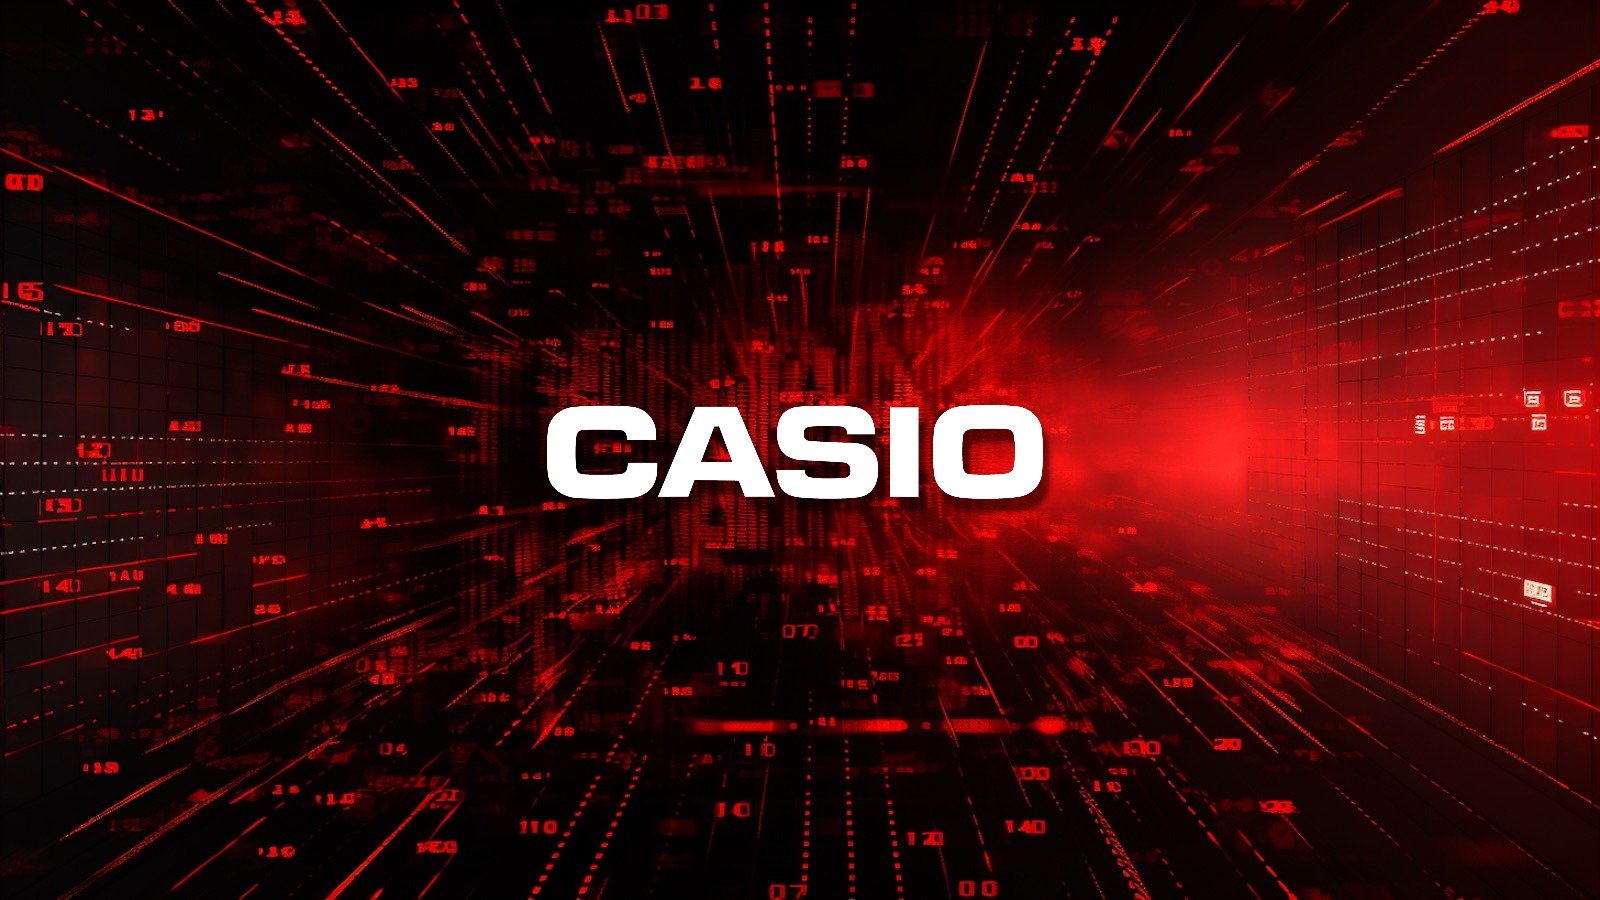 A red background with the word Casio prominently displayed.